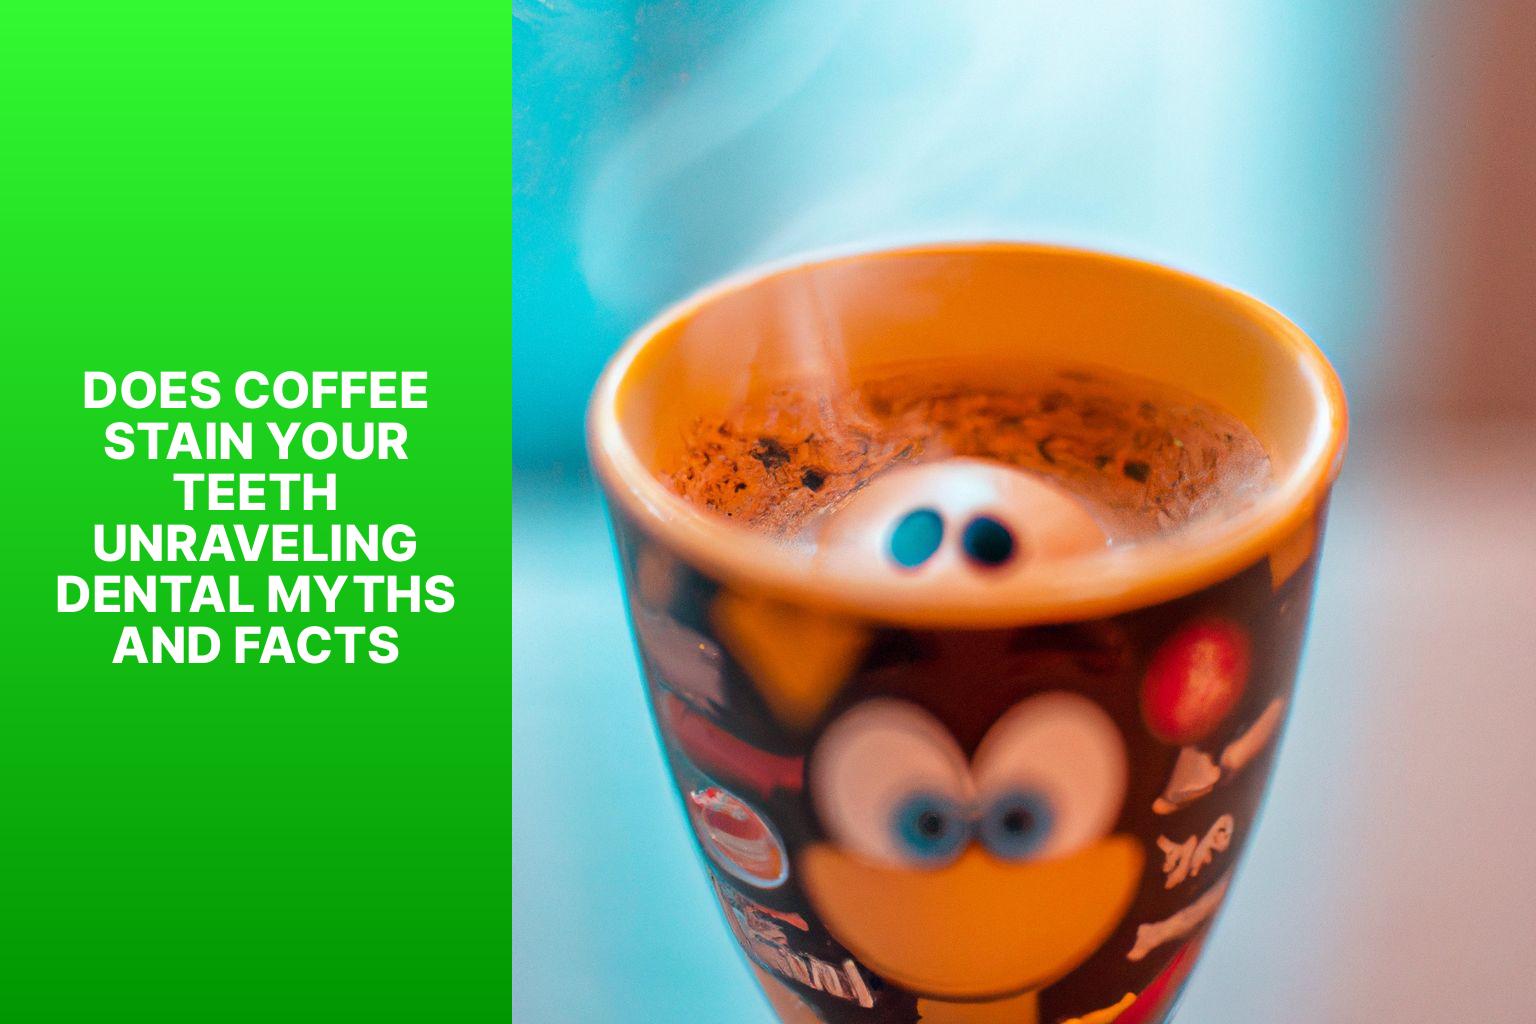 Does Coffee Stain Your Teeth? Unraveling Dental Myths and Facts